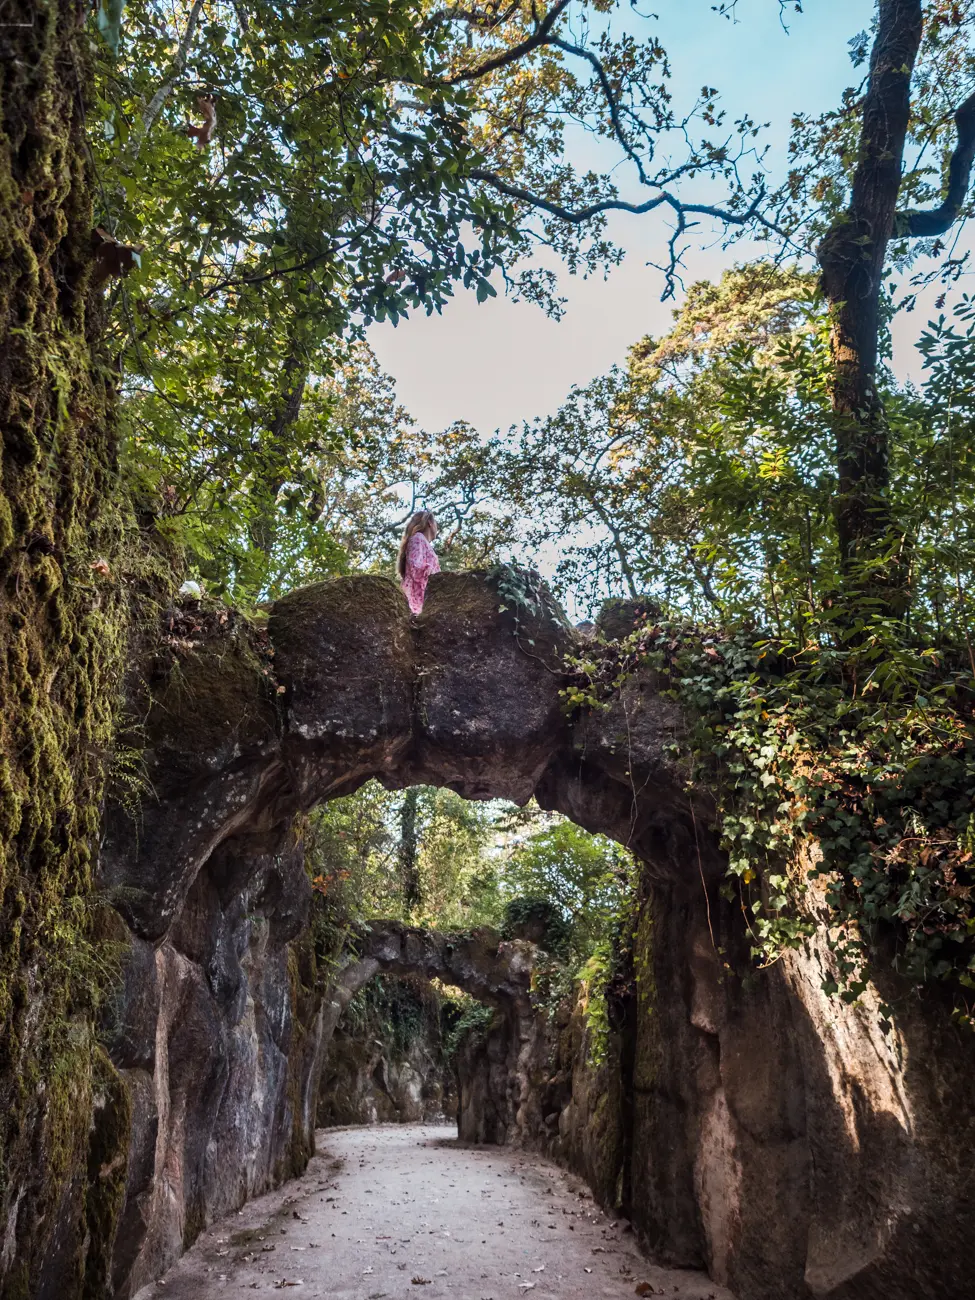 Road under two simple stone bridges in the forest of Quinta da Regaleira in Sintra Portugal.